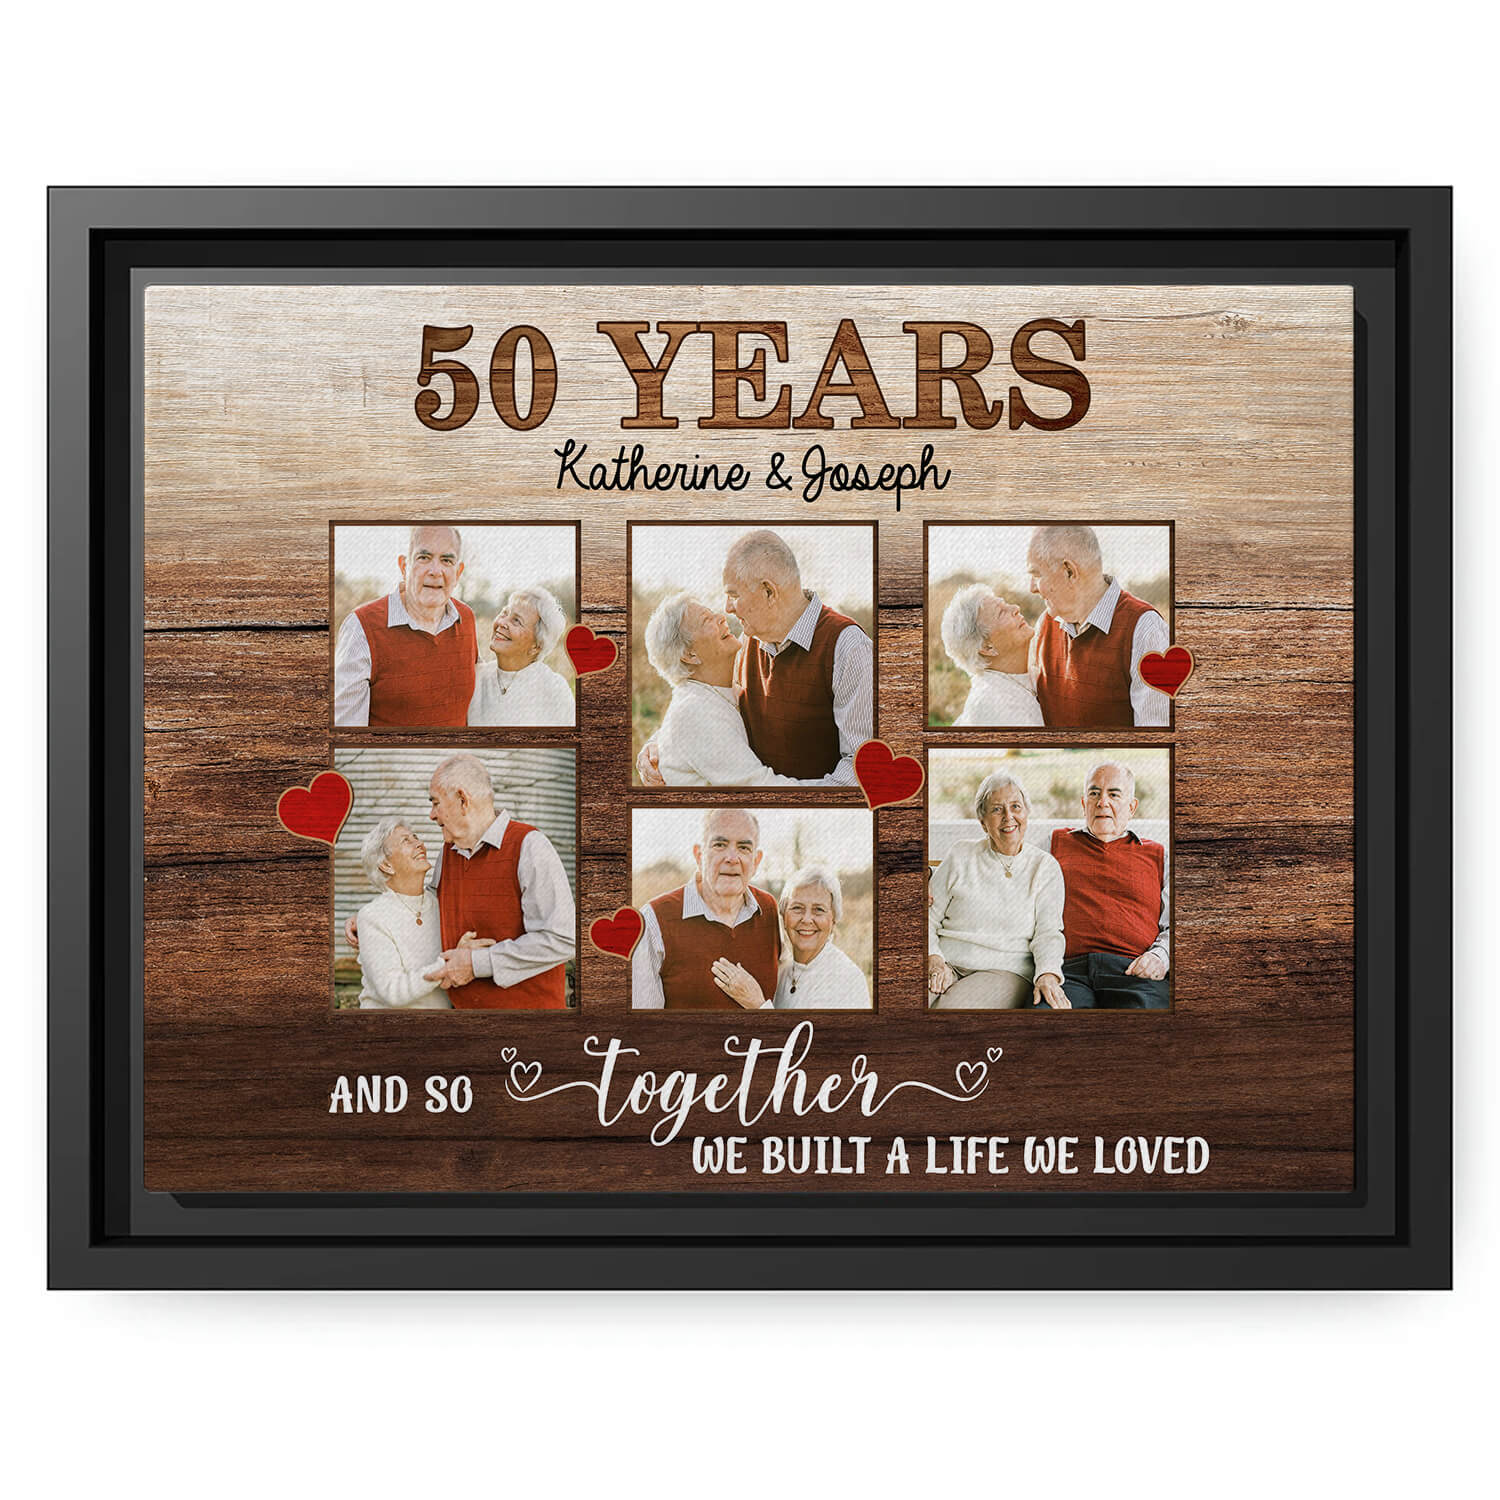 50 Years - Personalized 50 Year Anniversary gift For Husband or Wife - Custom Canvas Print - MyMindfulGifts